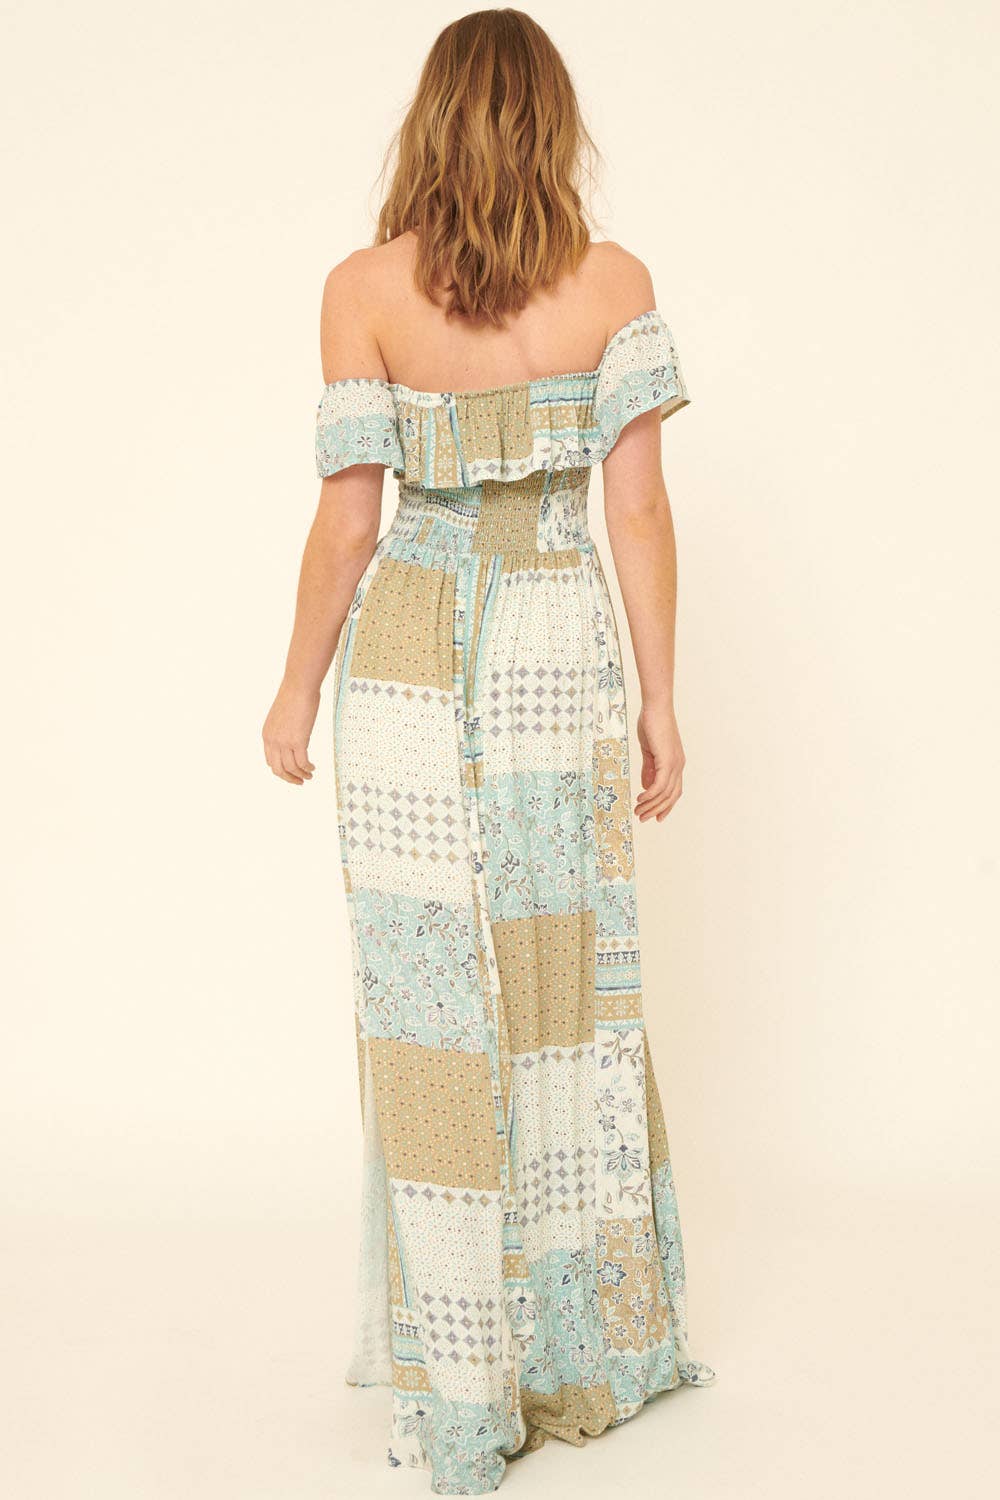 Seagrass Woven Patch Smocked Sleeveless Maxi Dress